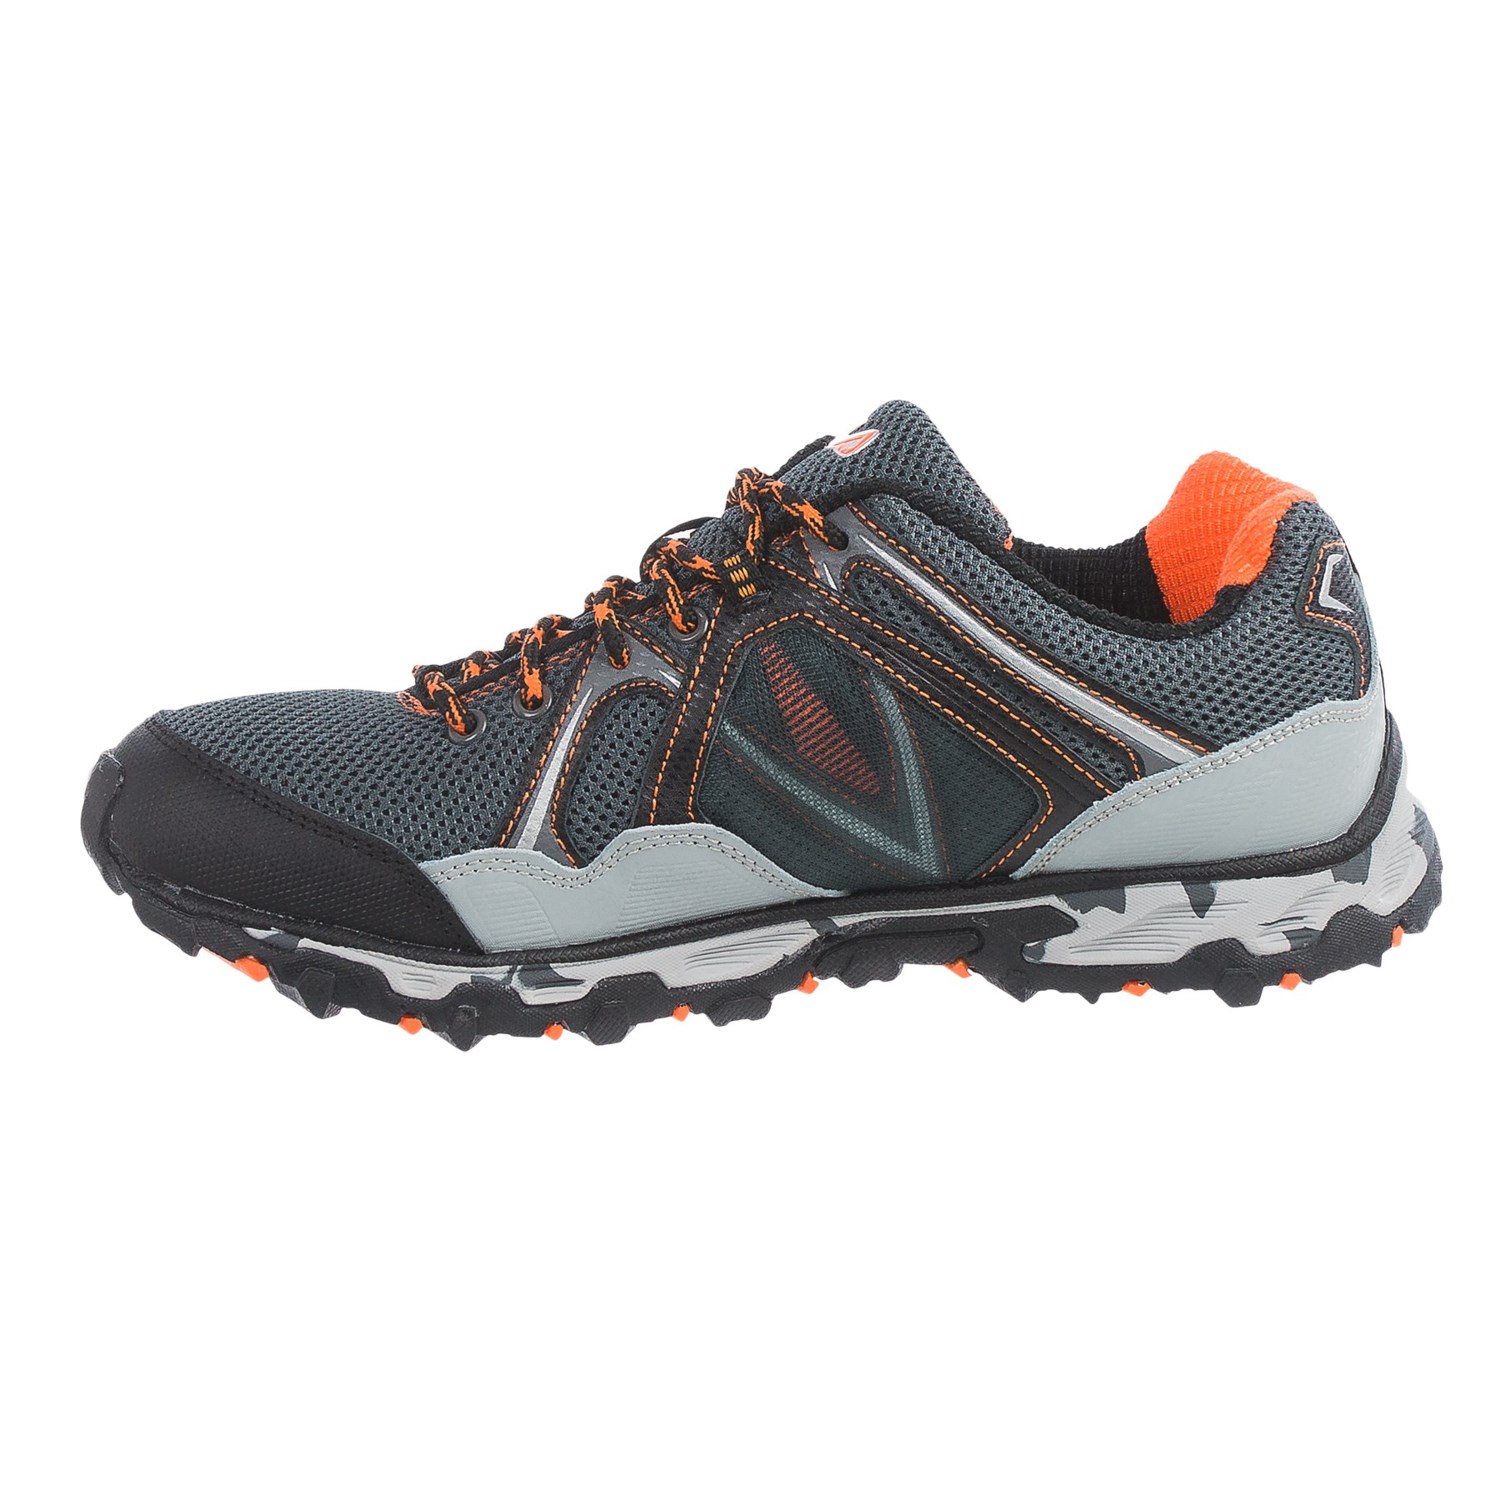 Fila Vitality 8 Trail Running Shoes (For Men) - Save 64%